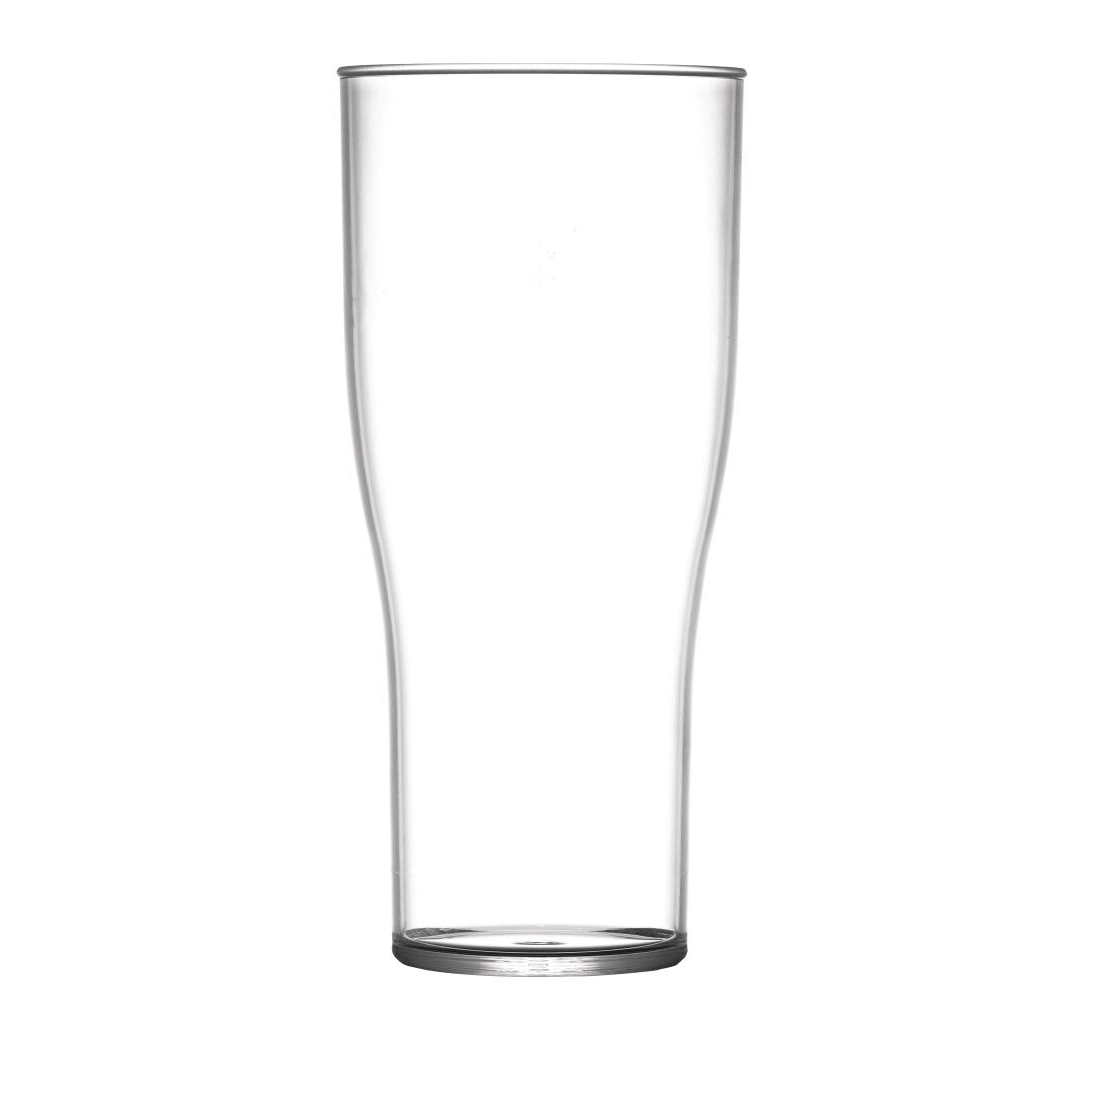 BBP Polycarbonate Nucleated Pint Glasses CE Marked